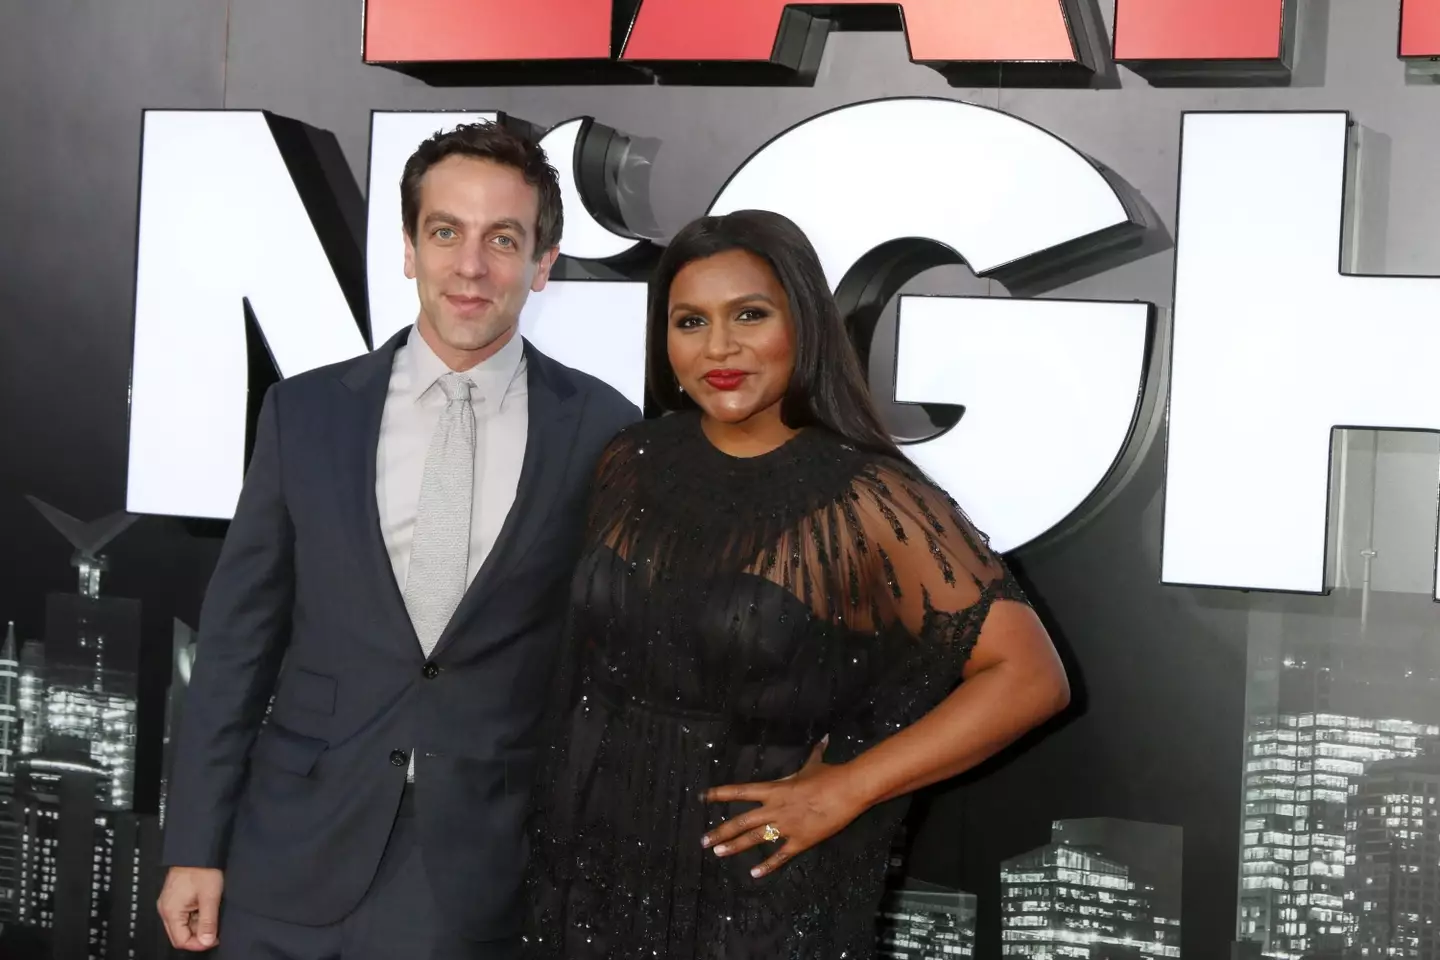 Is B.J. Novak secretly the father of Mindy Kaling's kids? She doesn't seem that bothered about the rumours.